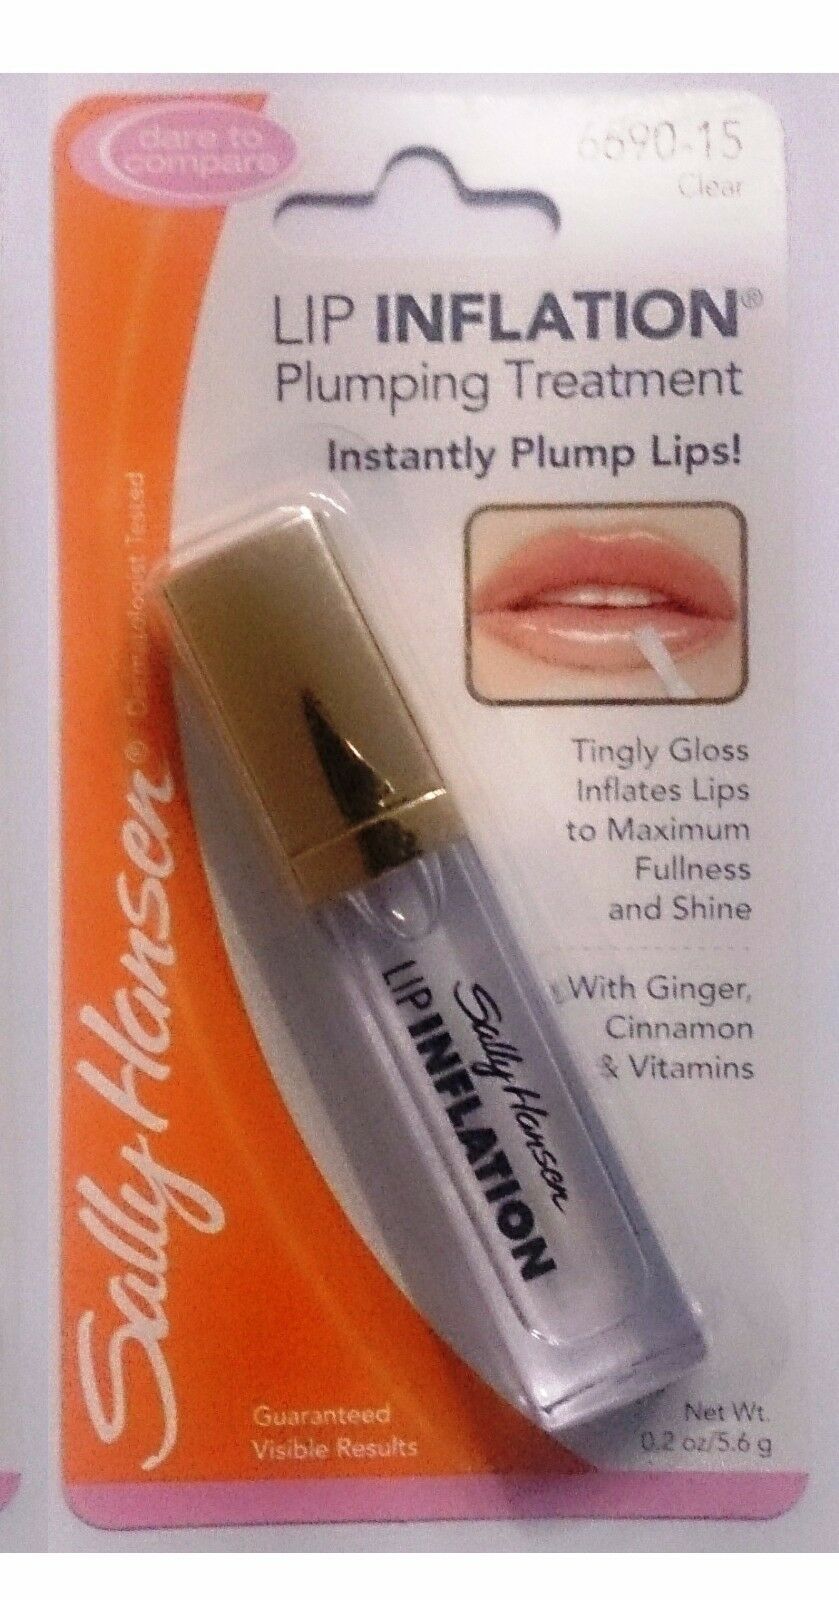 Sally Hansen Lip Inflation Plumping Treatment - 6690-15 Clear